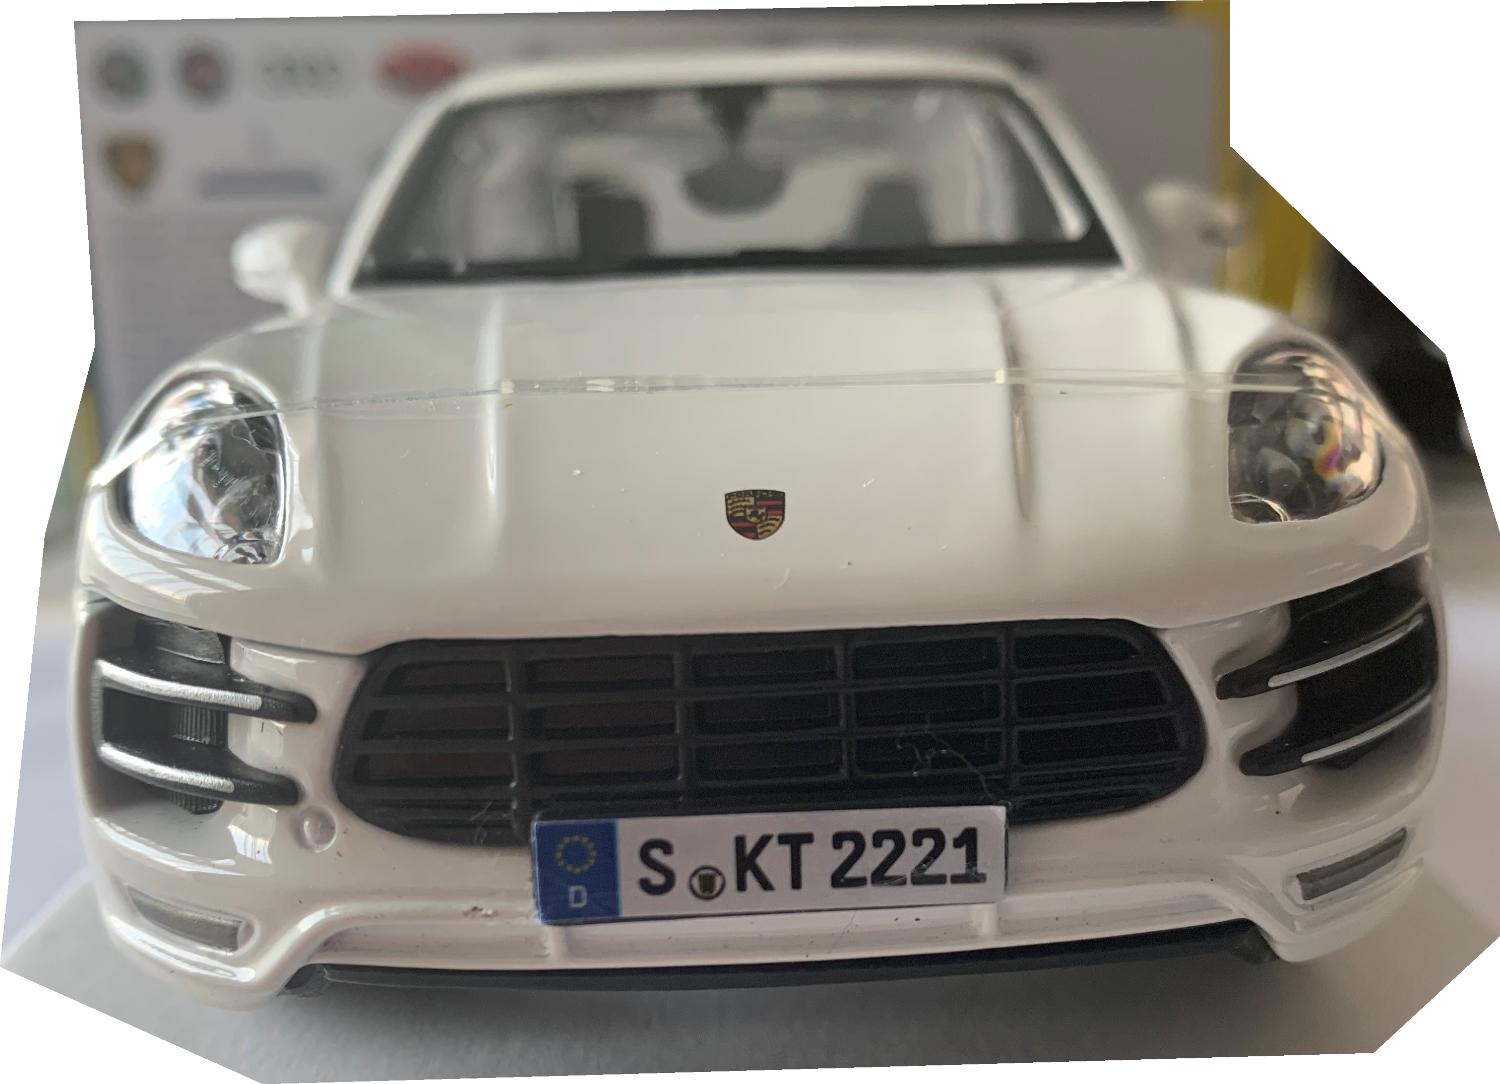 An excellent reproduction of the Porsche Macan with high level of detail throughout, all authentically recreated